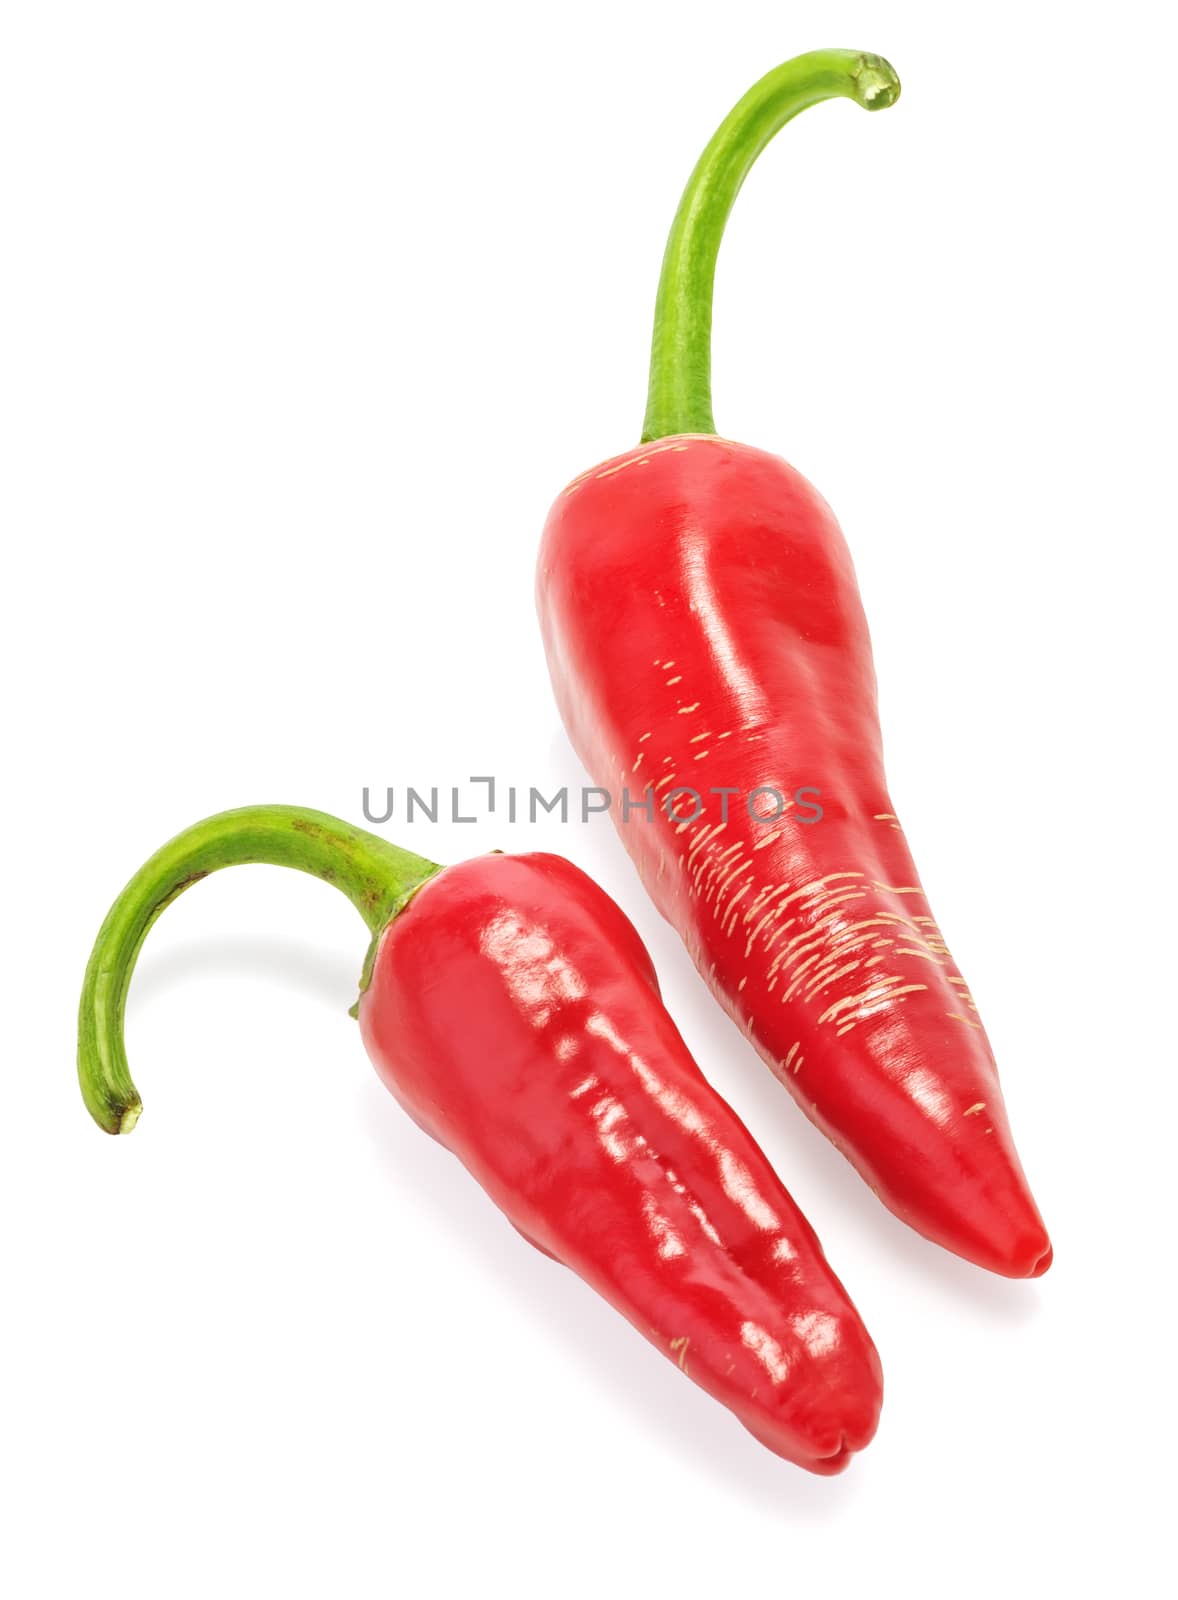 Two red hot chilli peppers isolated on white background